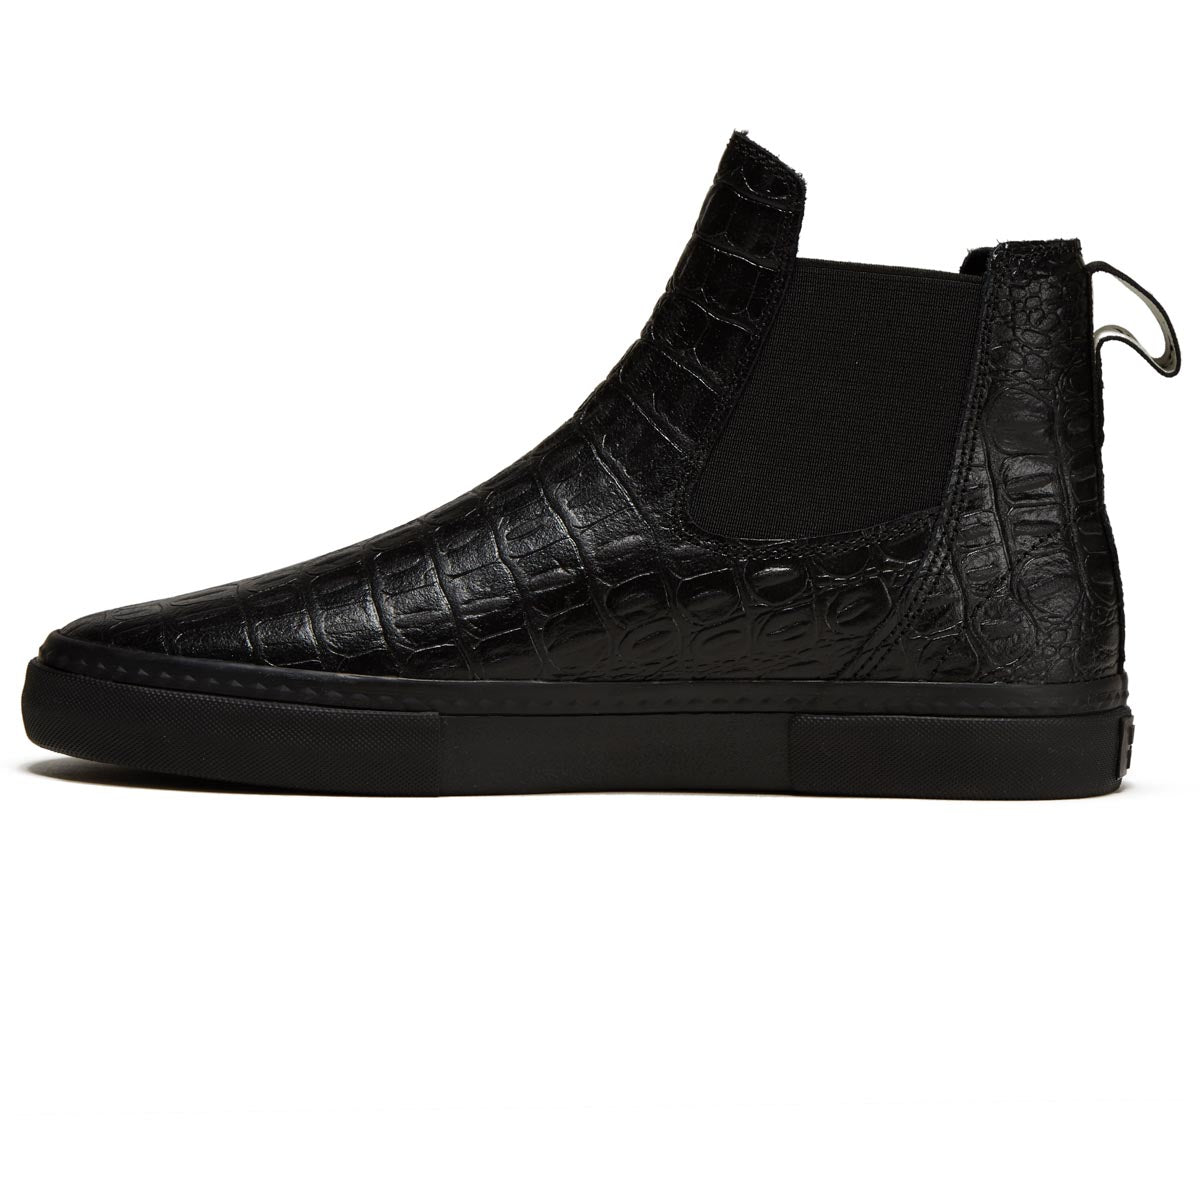 Globe Dover II Shoes - Black Croc/Wasted Talent image 2